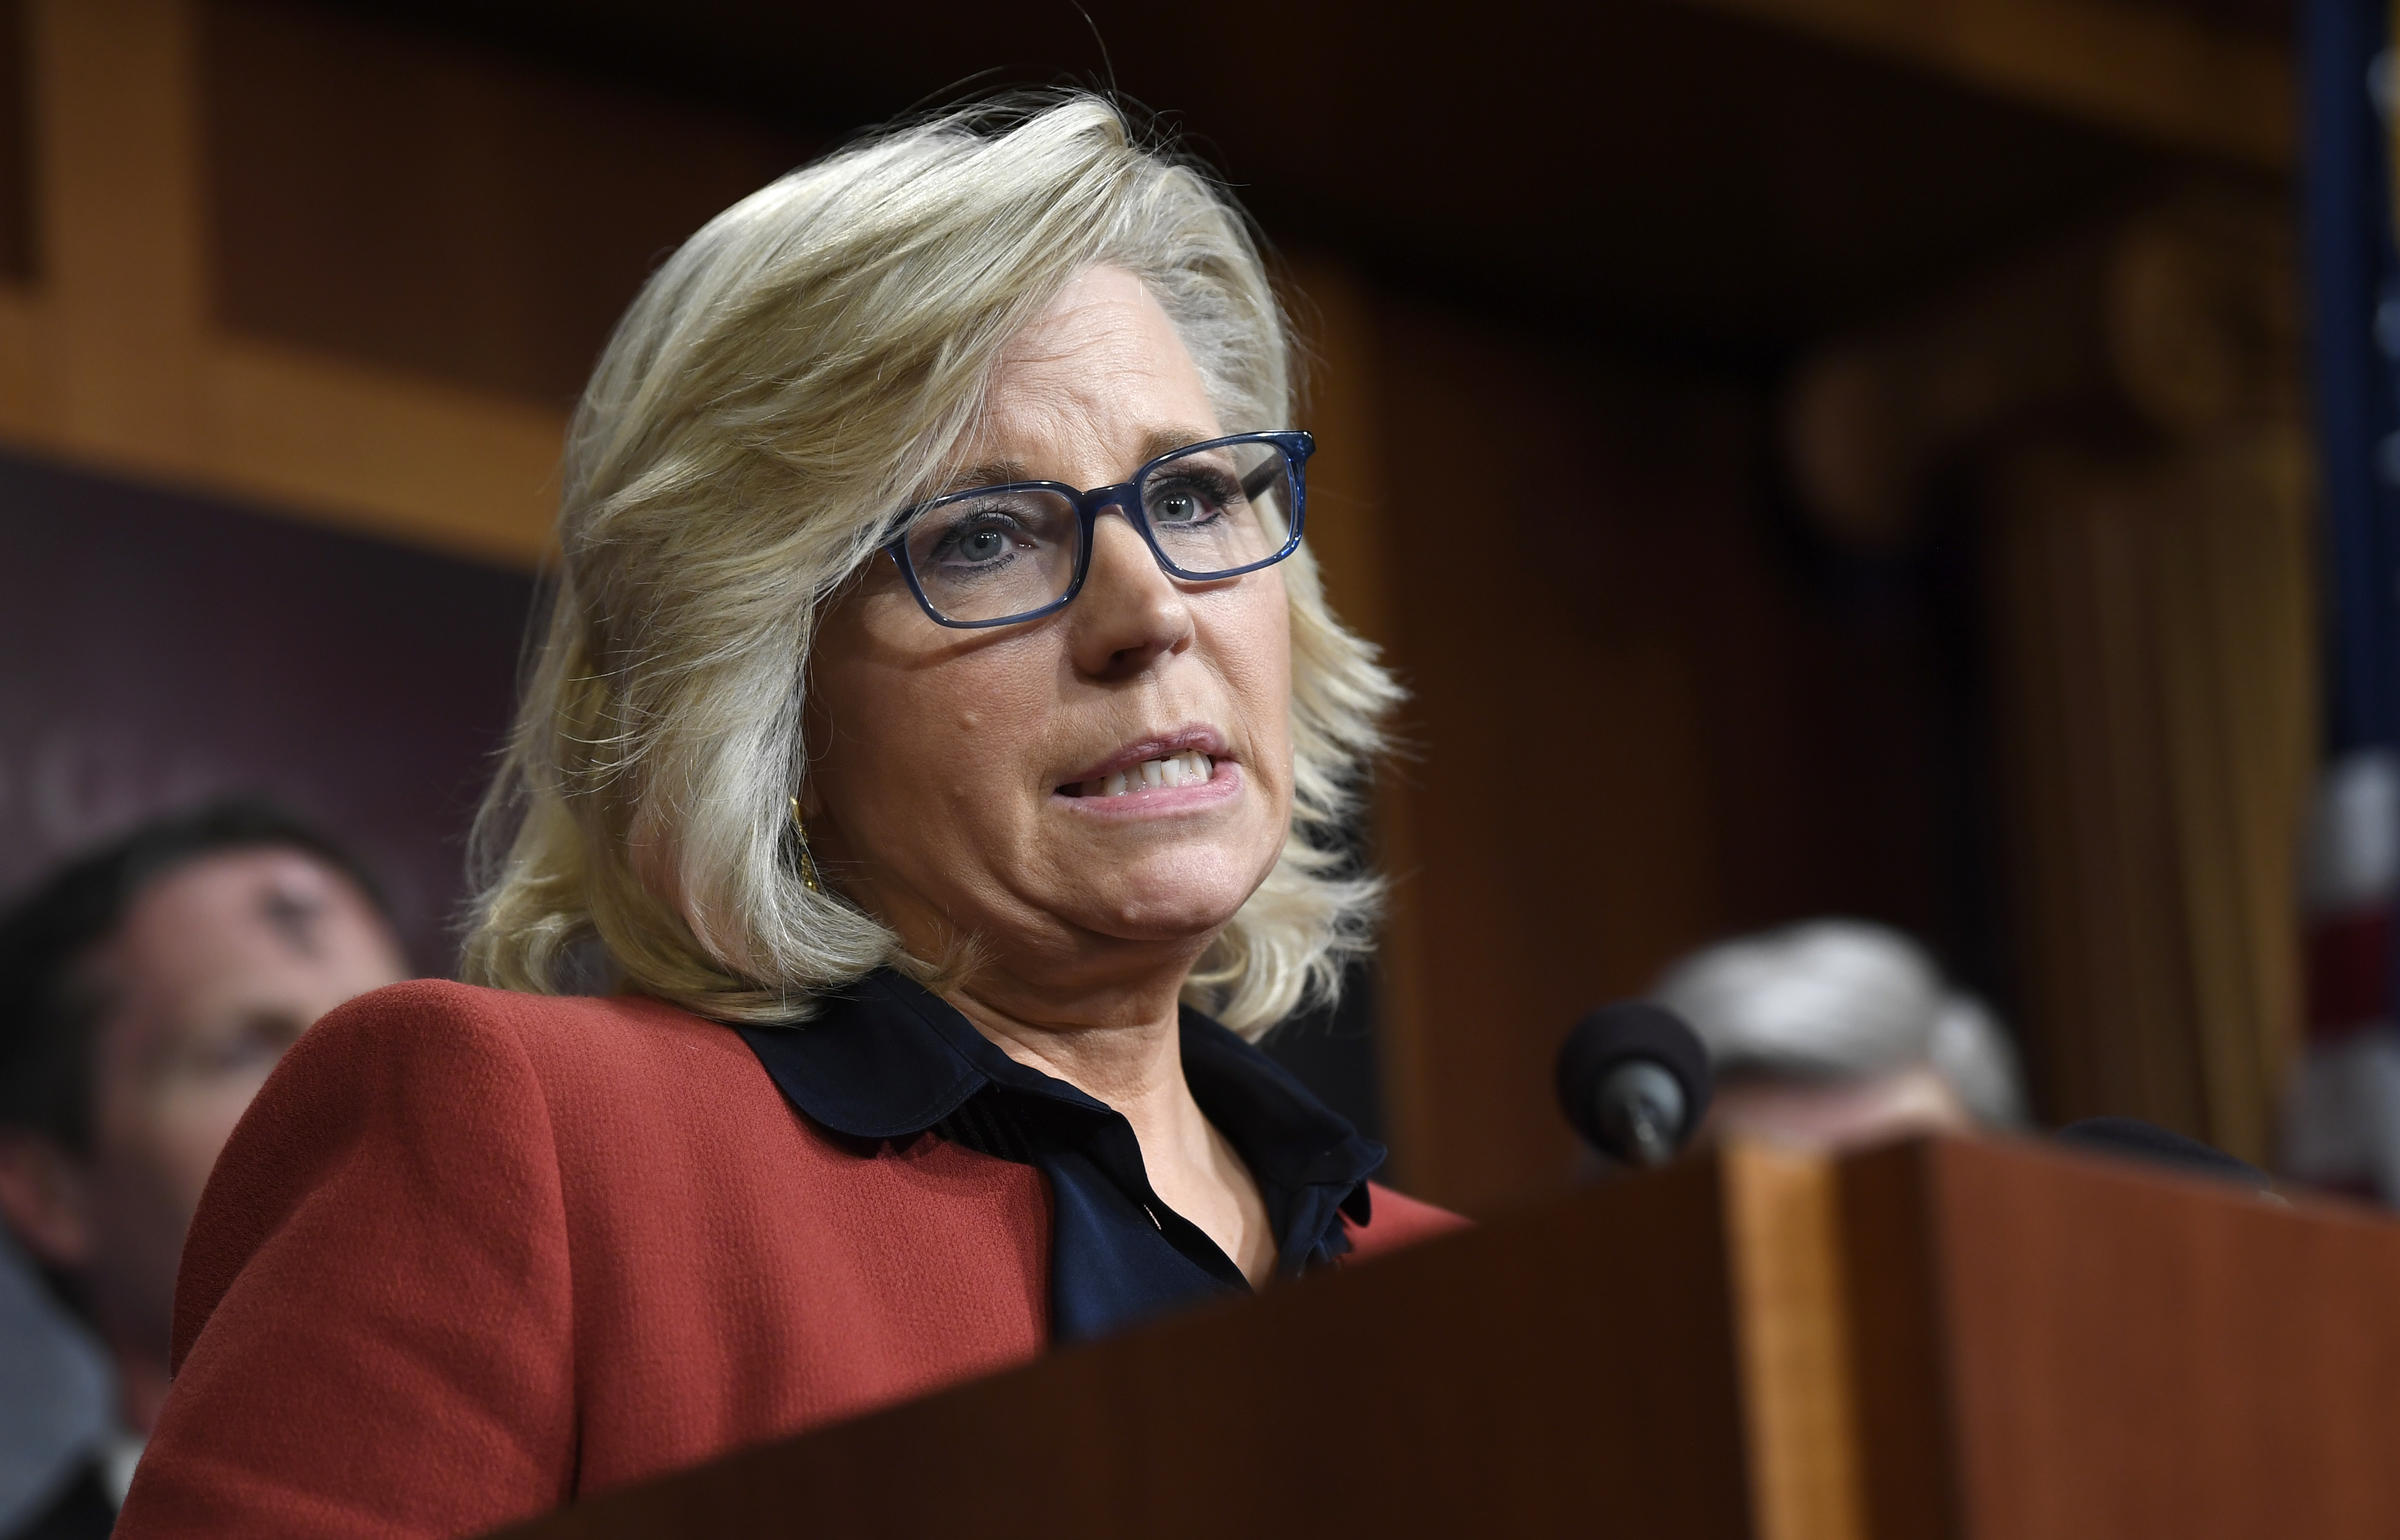 Wyoming Gop Censures Liz Cheney For Voting To Impeach Trump Wjct News 7518